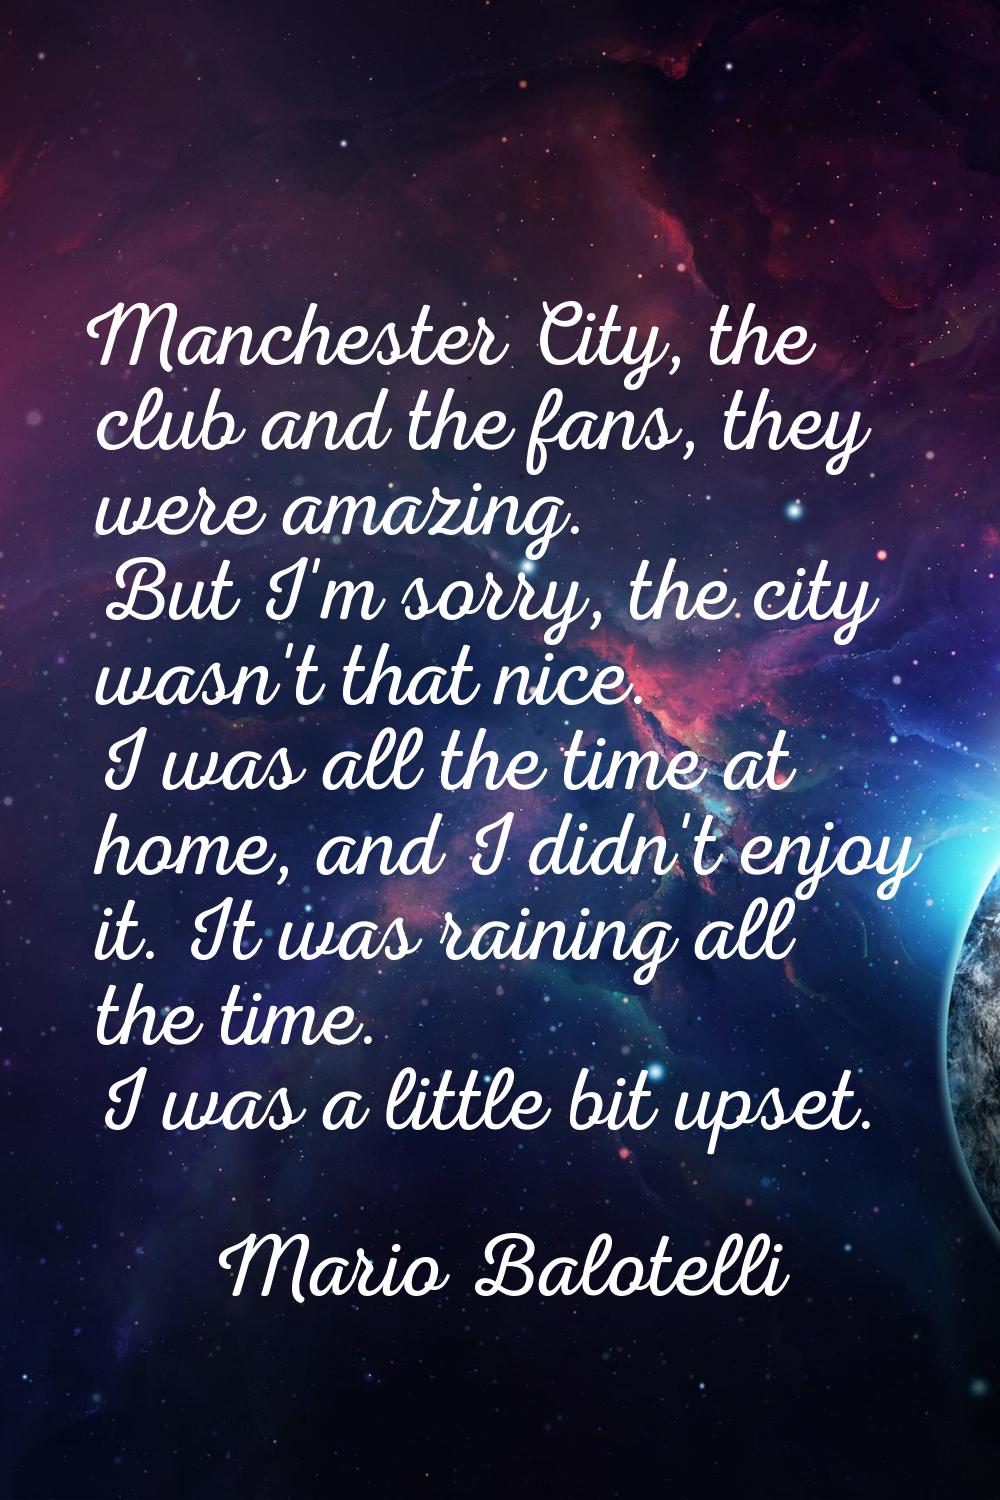 Manchester City, the club and the fans, they were amazing. But I'm sorry, the city wasn't that nice